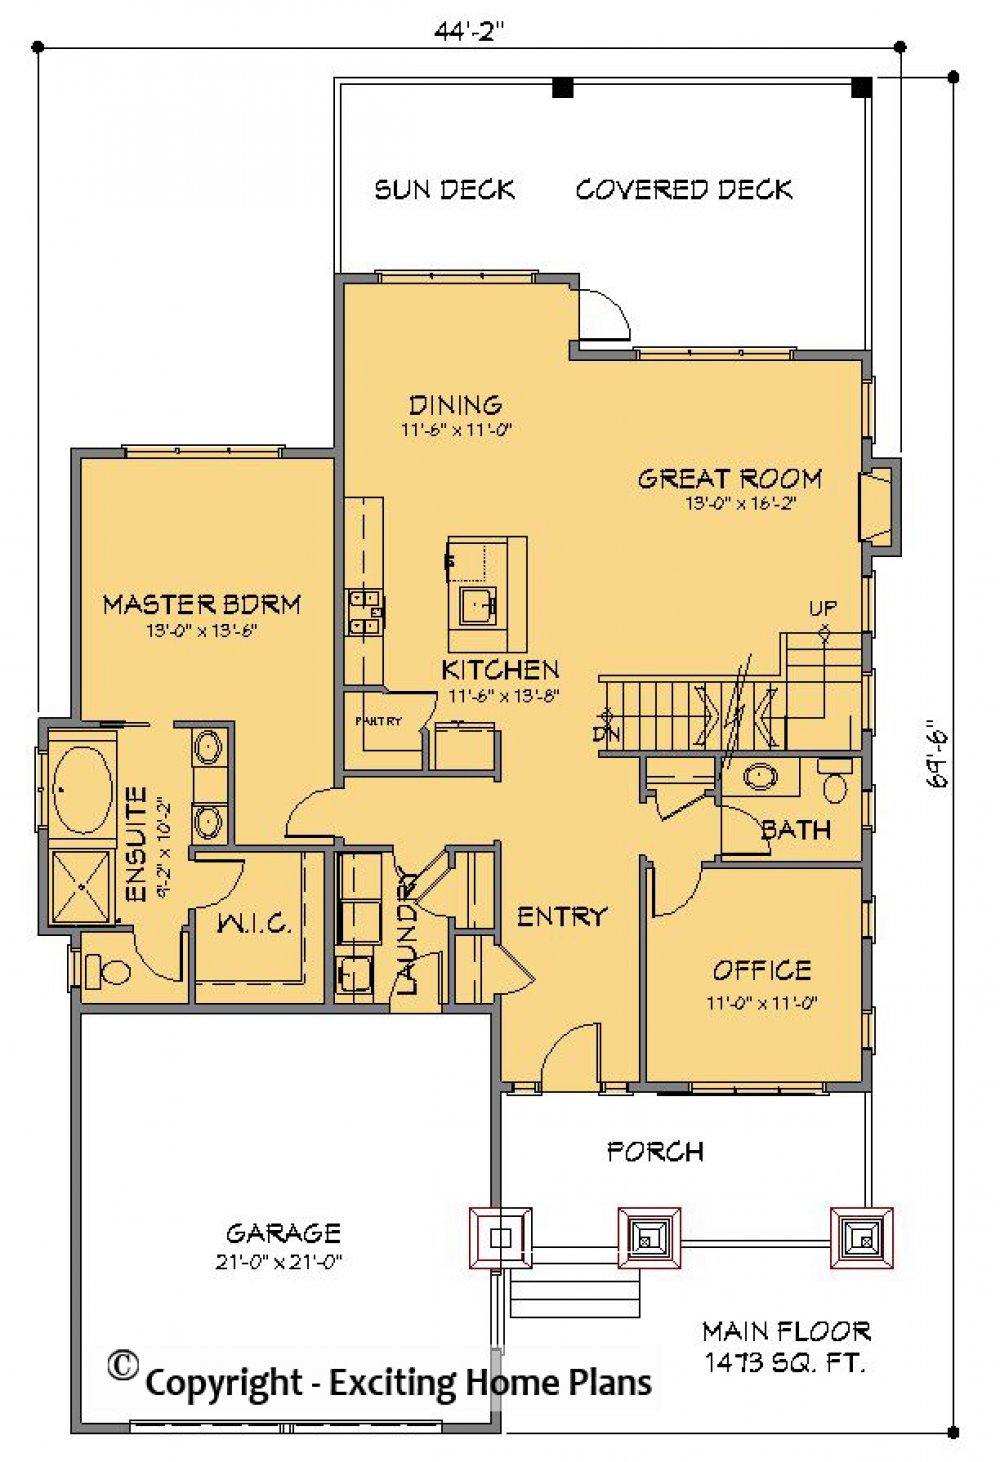 House Plan Information for Wisconsin III